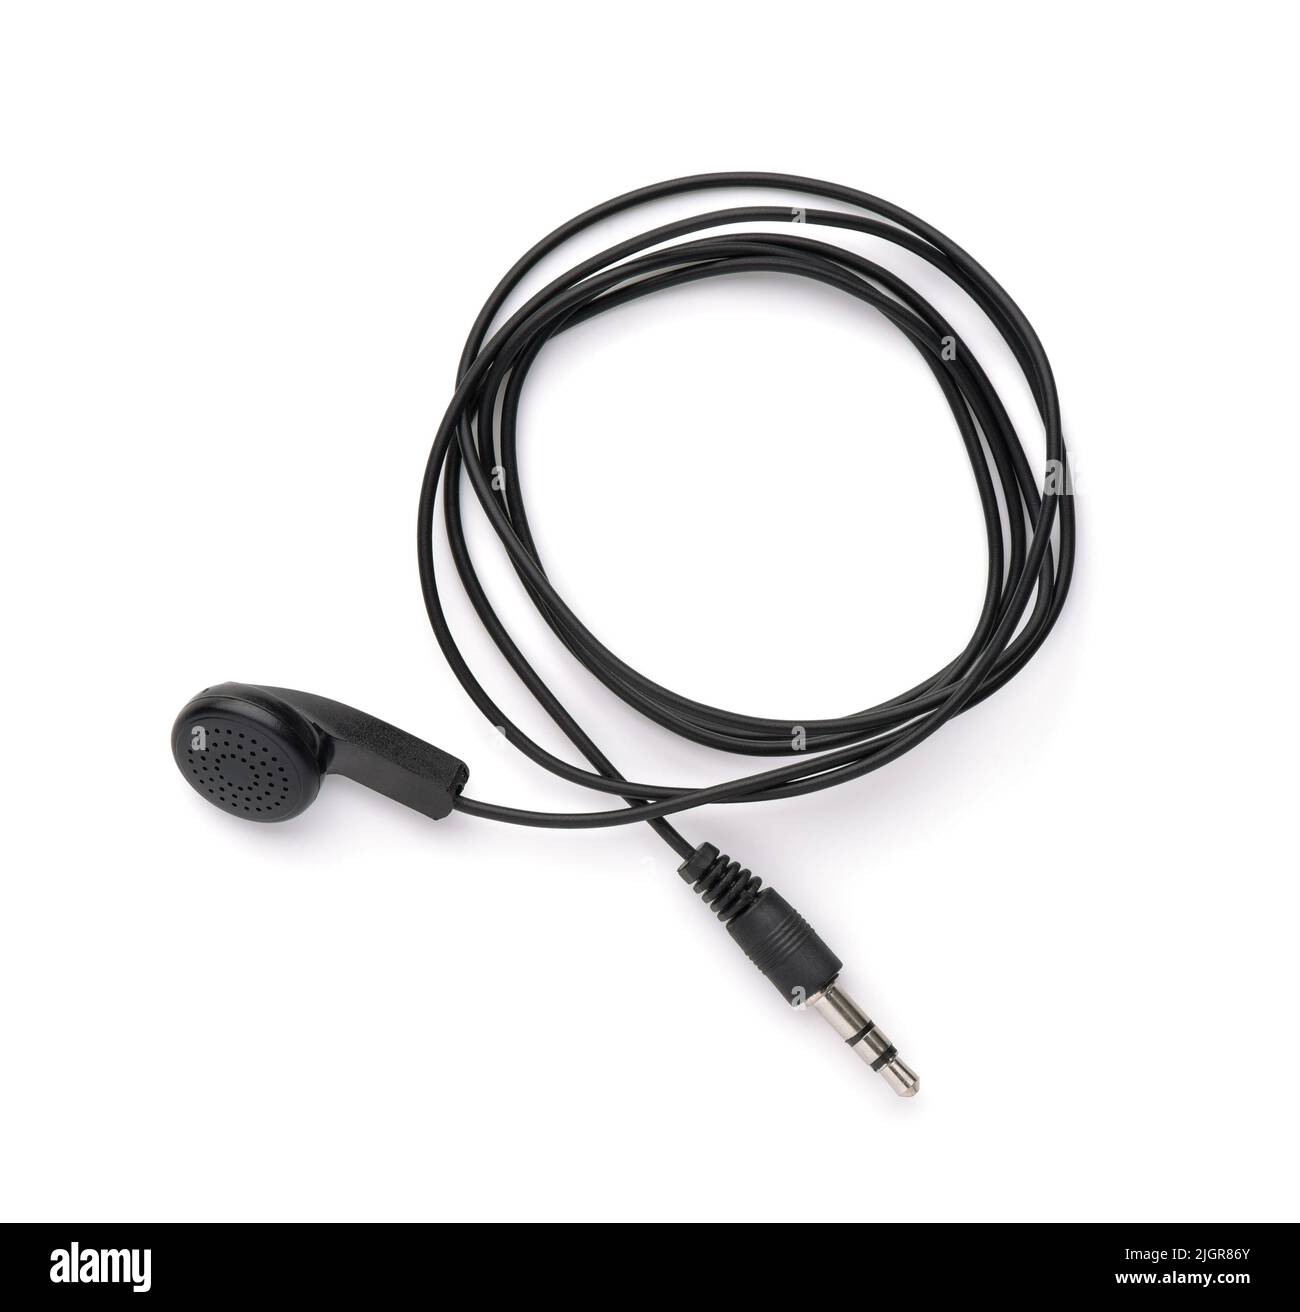 Top view of black single ear wired earbud headphone isolated on white Stock Photo